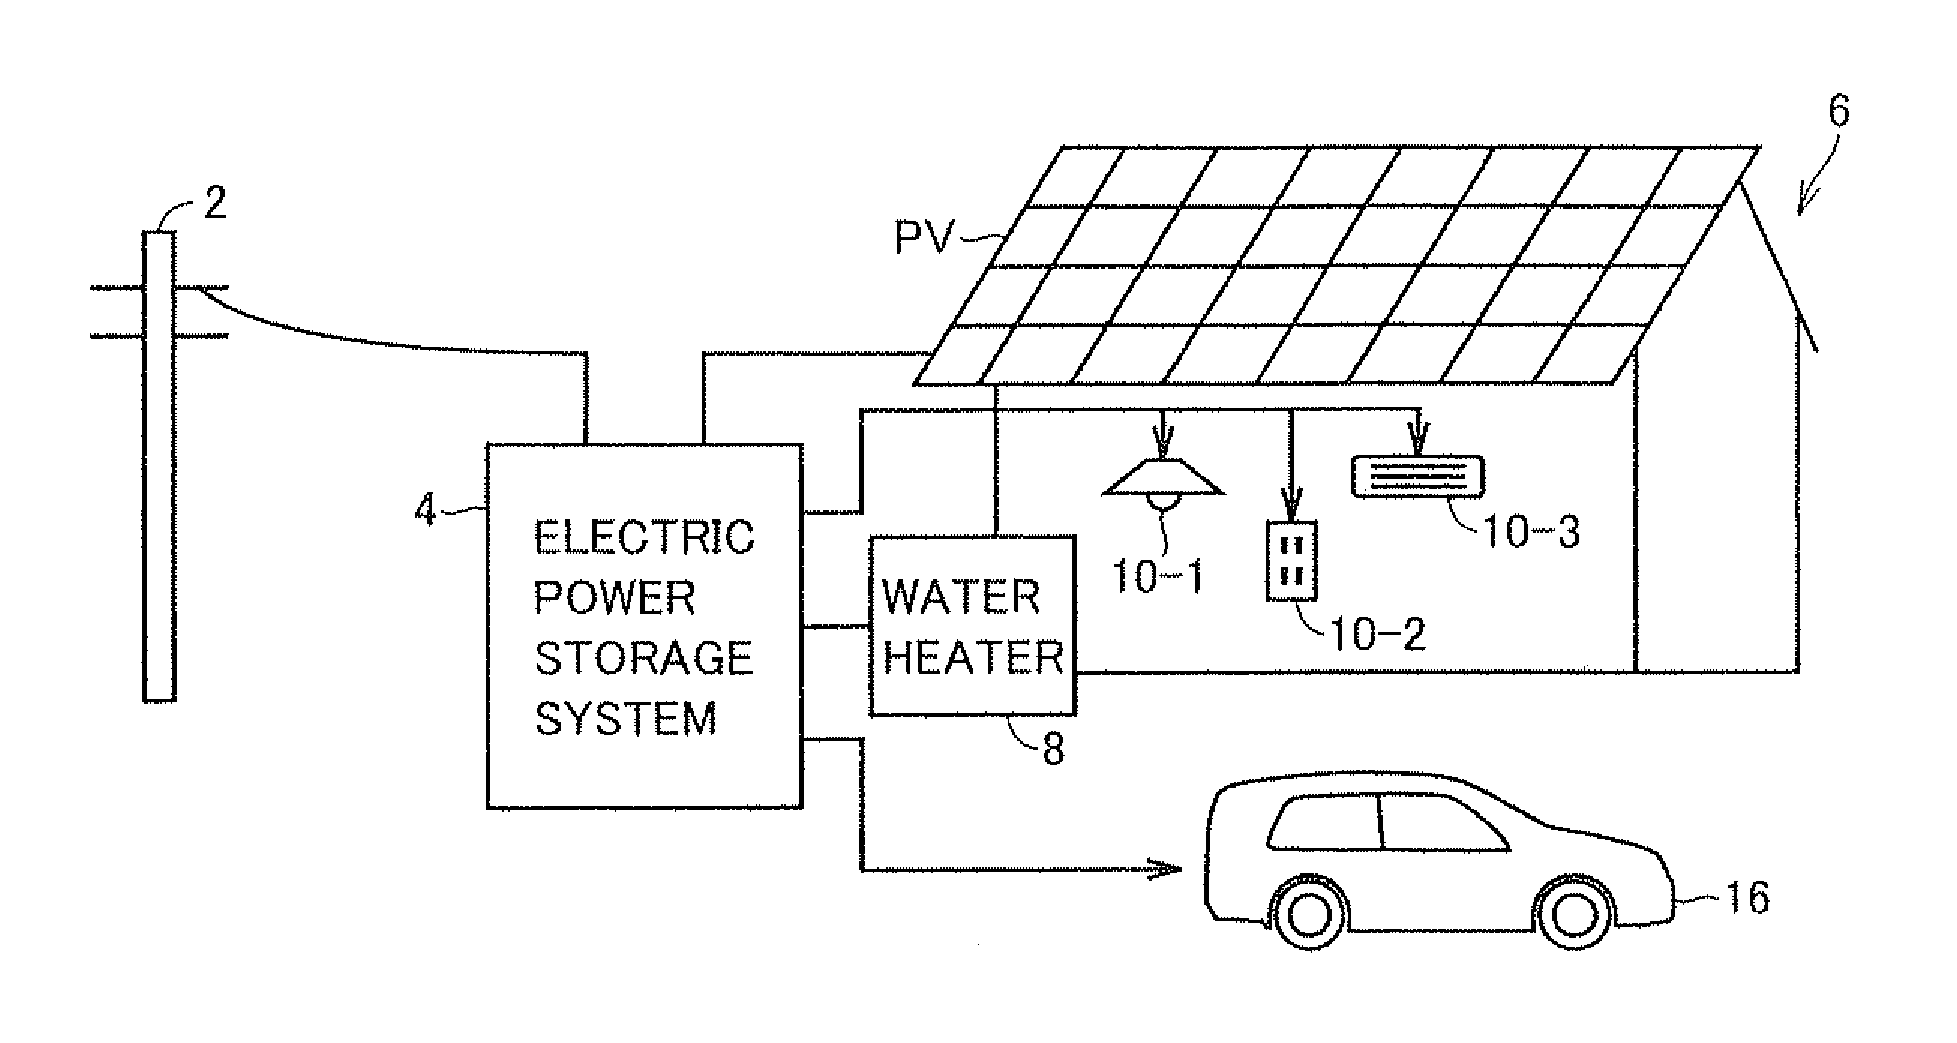 Residential electric power storage system